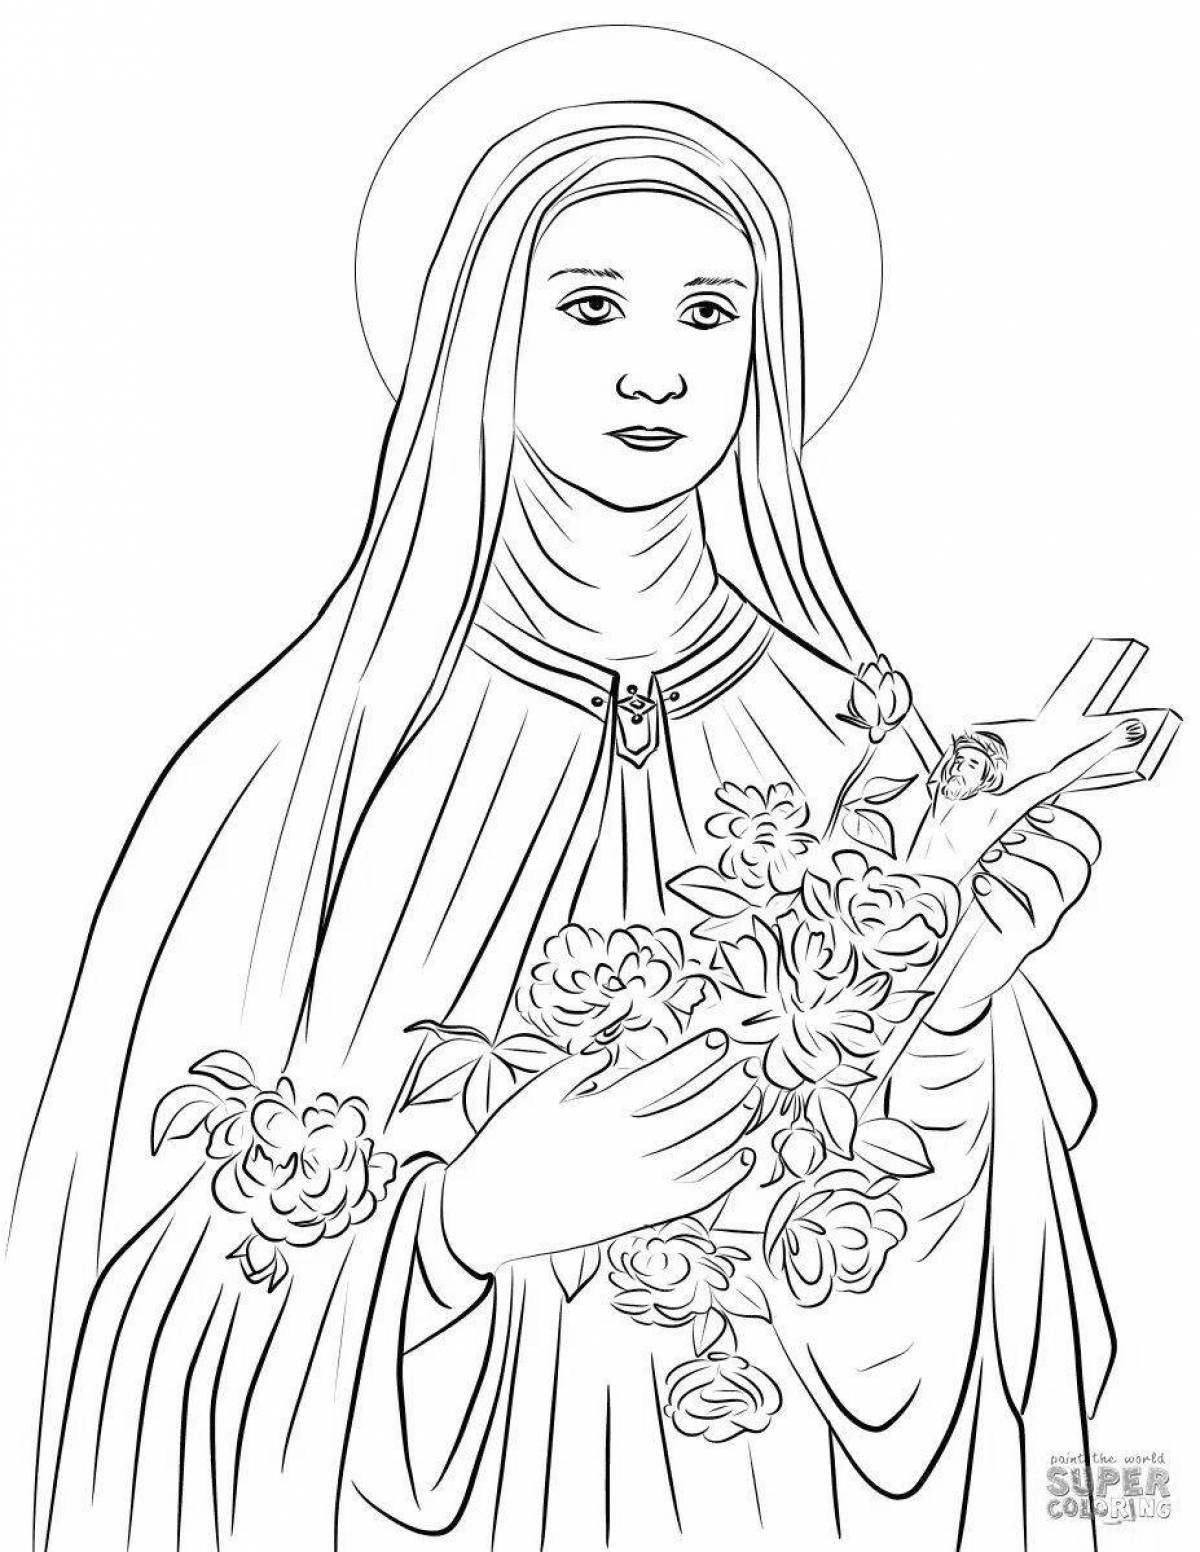 Coloring page glorified virgin mary